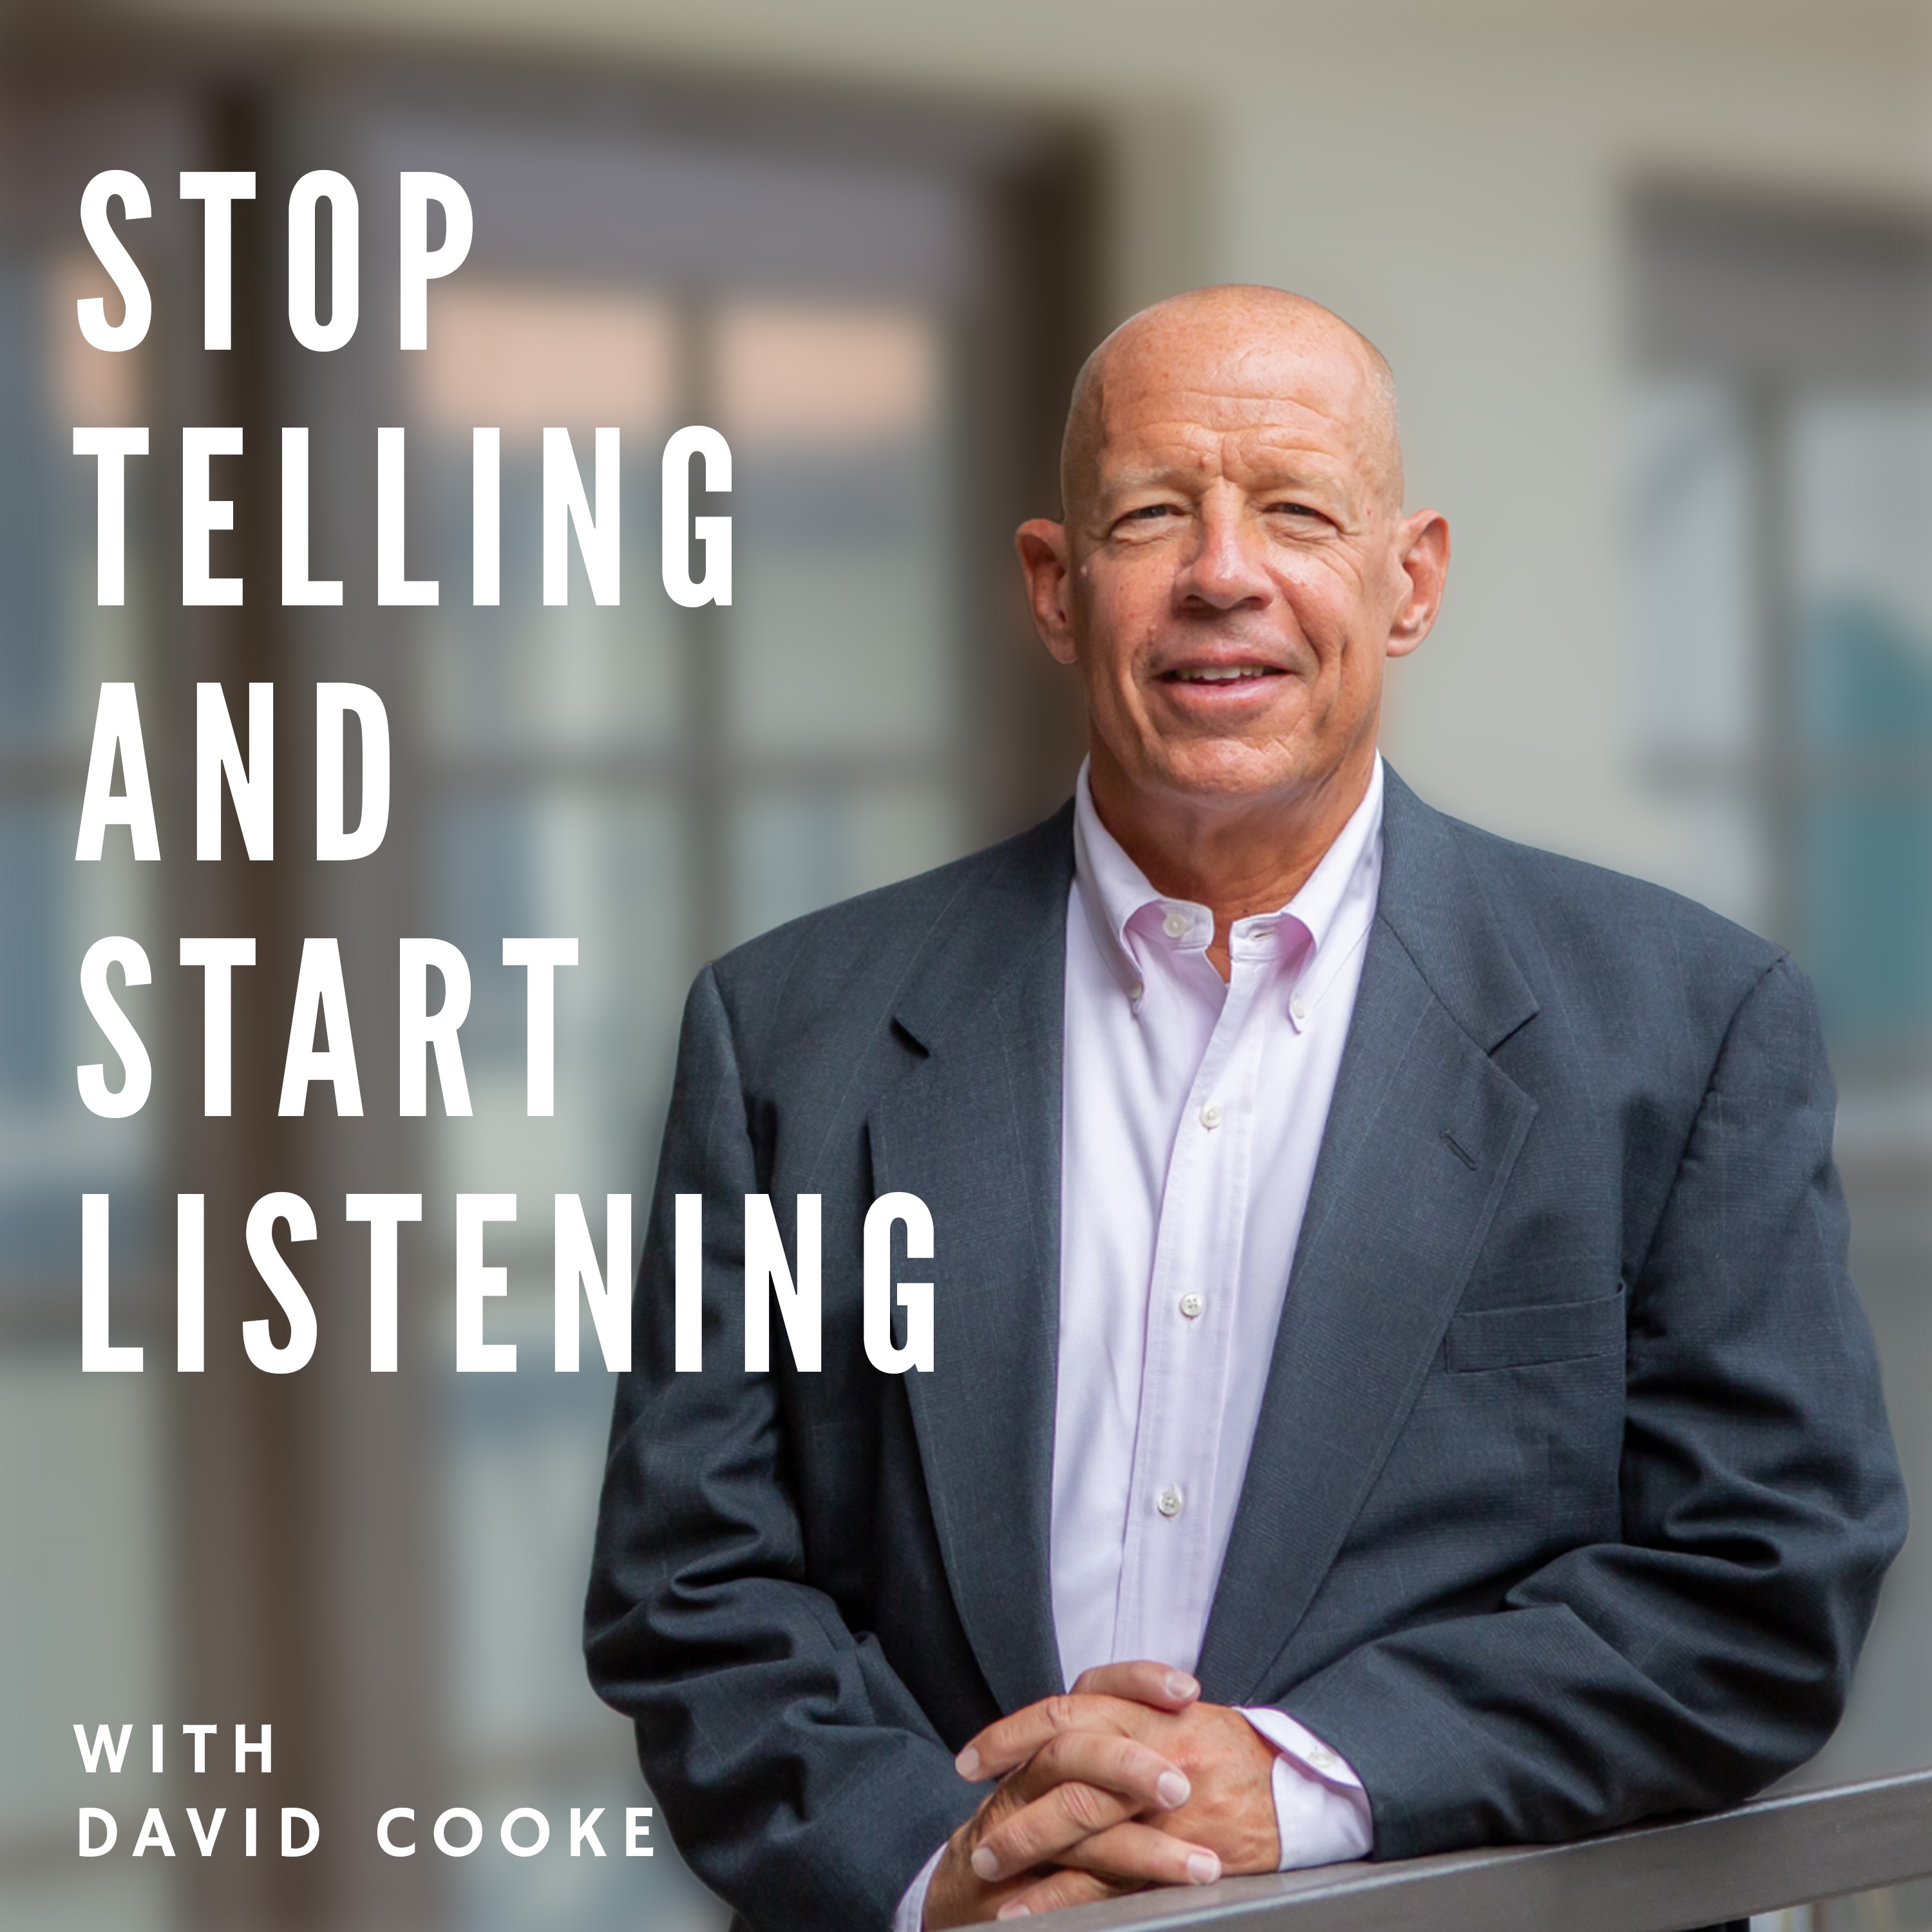 Stop Telling and Start Listening